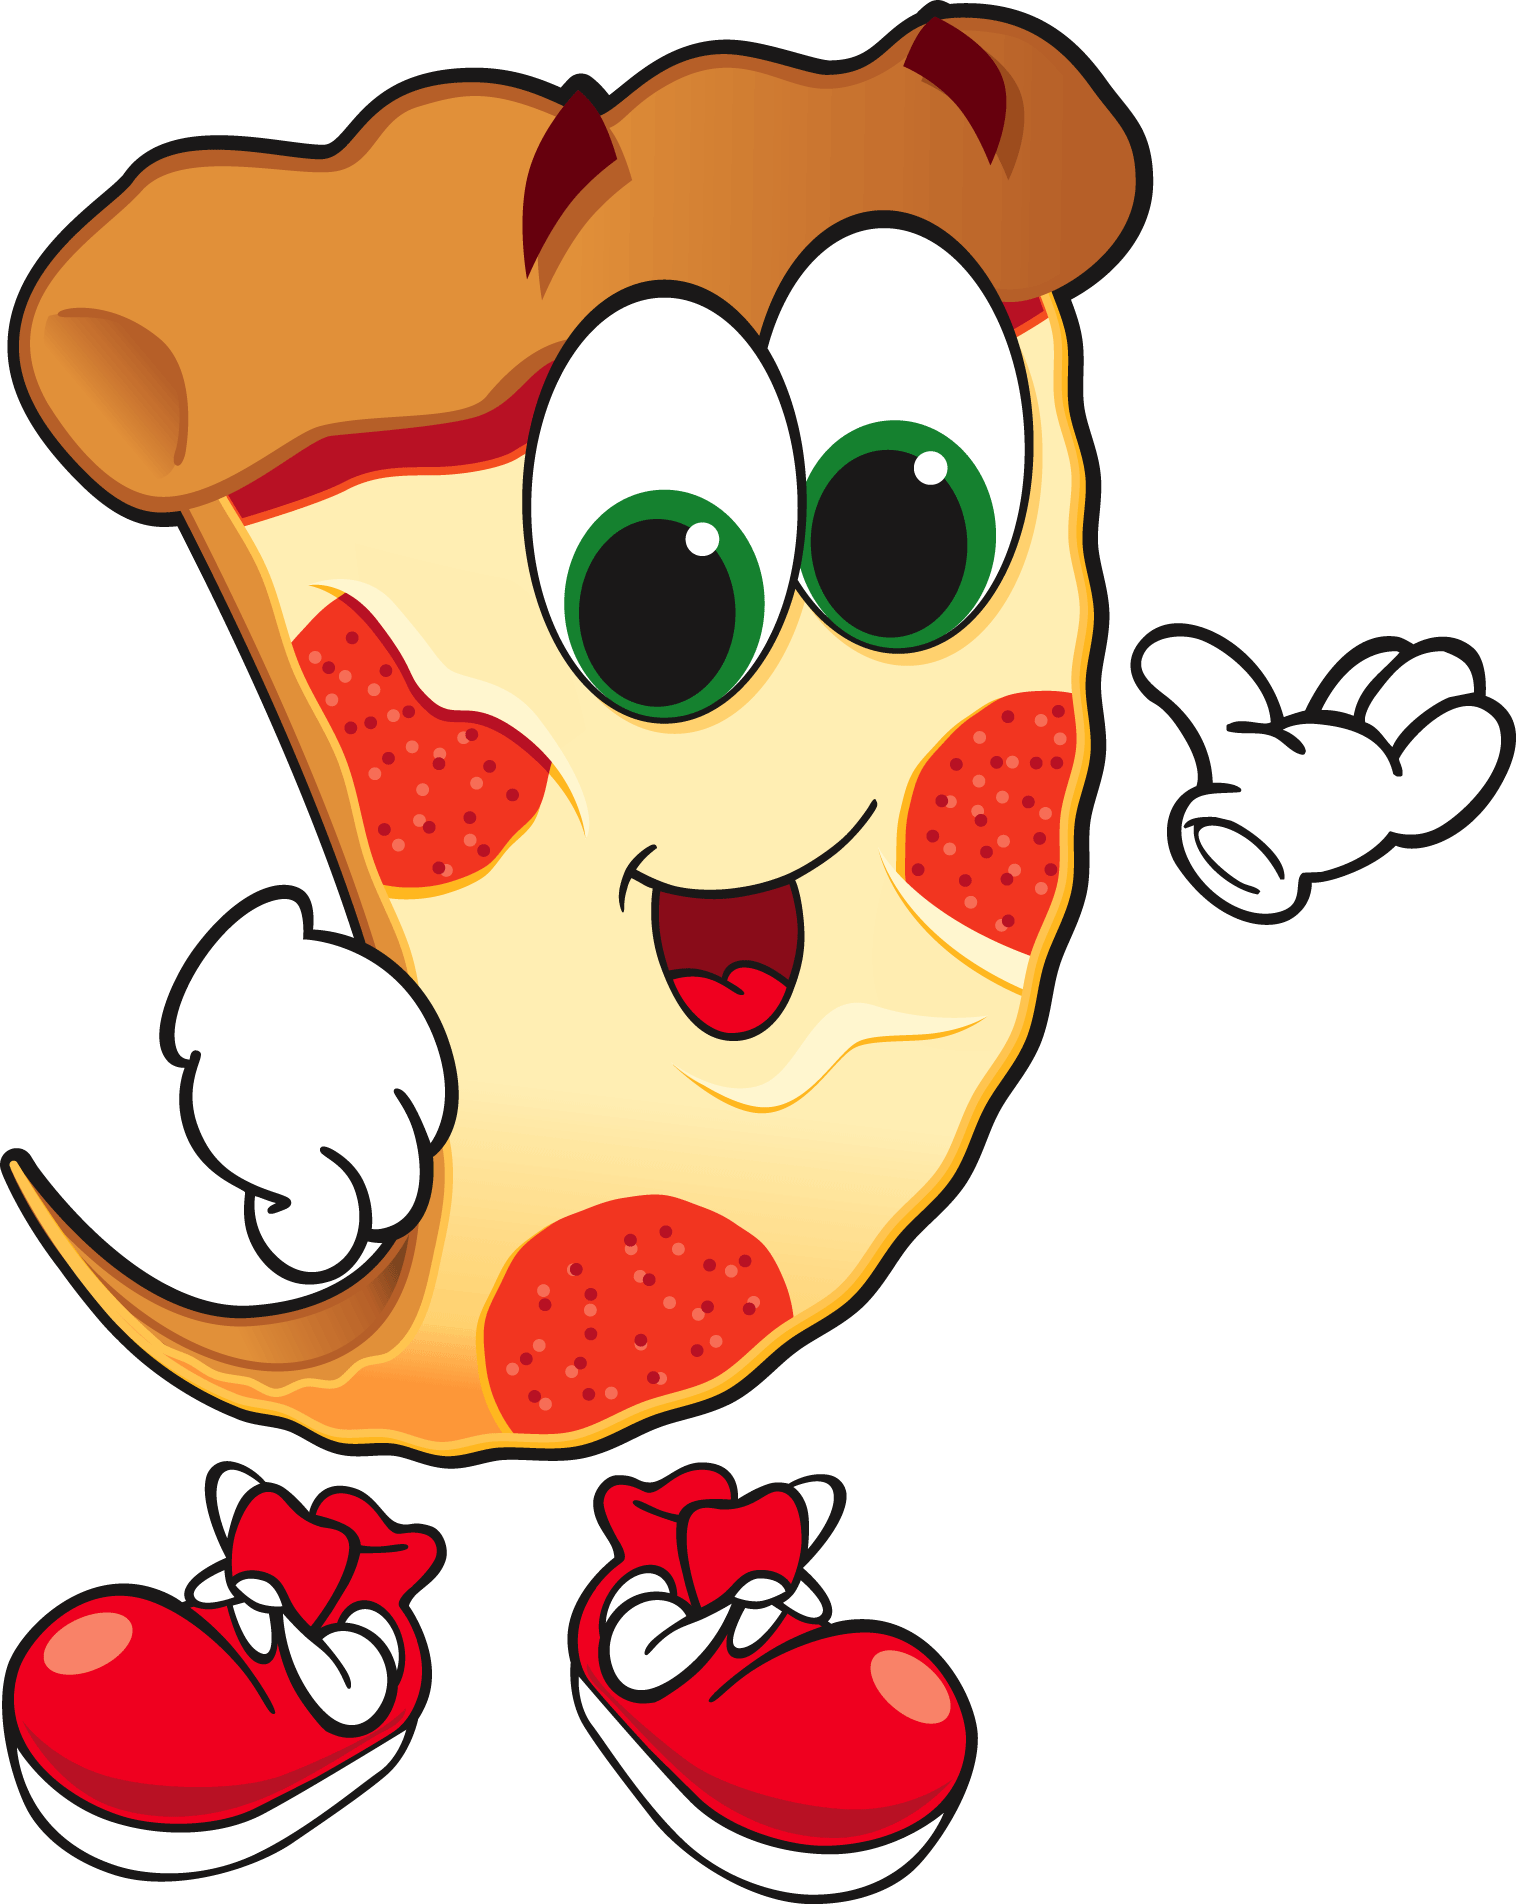 Pizza Slice Cartoon For Kids - Animated Pictures Of Pizza (1516x1904)